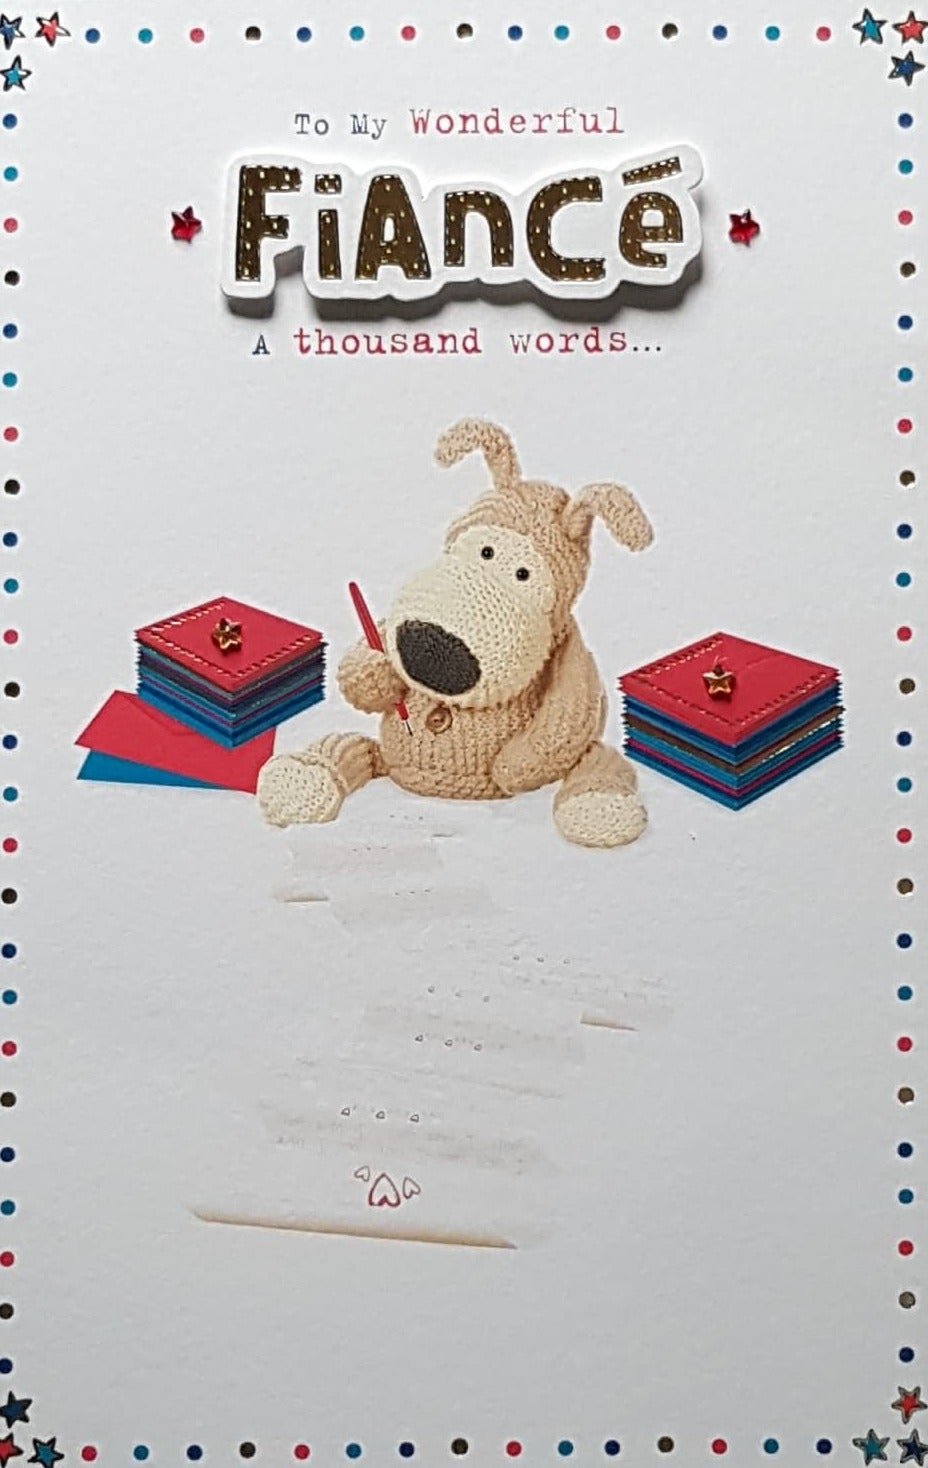 Birthday Card - Fiance / A Cute Dog Writing A Long Letter & Red Stars